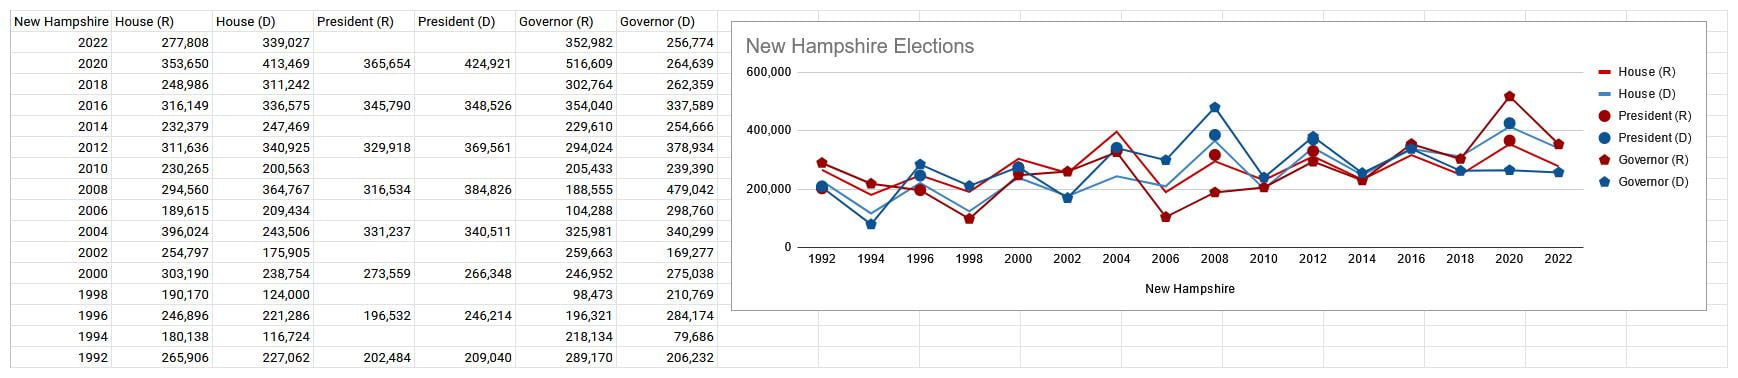 Historical vote data for battlegrounds and other states of...